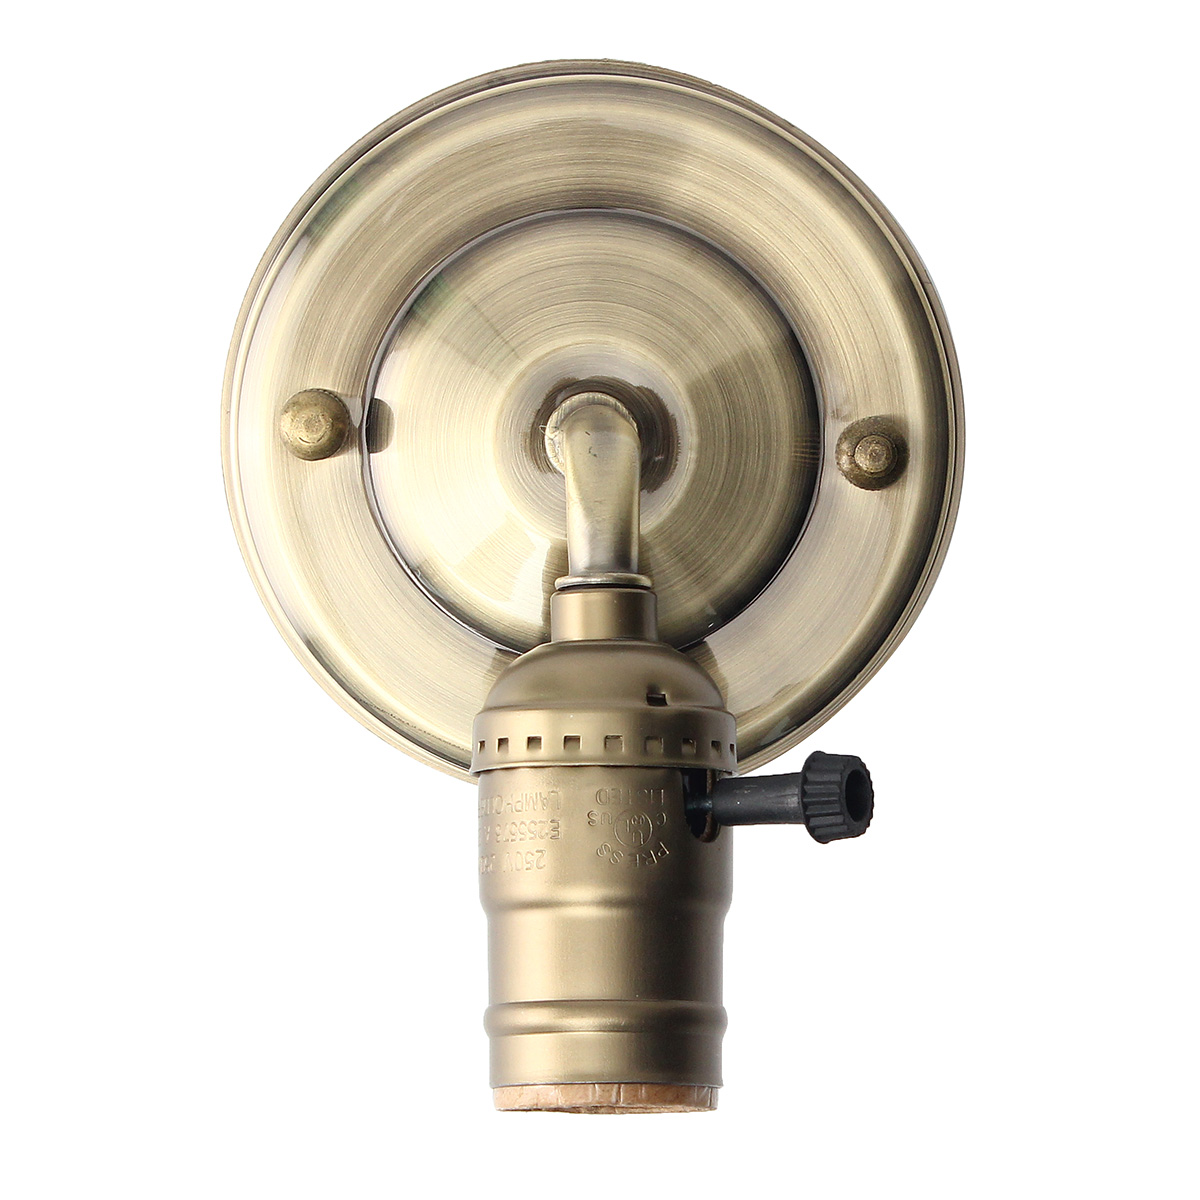 E27-Antique-Vintage-Switch-Type-Wall-Light-Sconce-Lamp-Bulb-Socket-Holder-Fixture-1077624-7